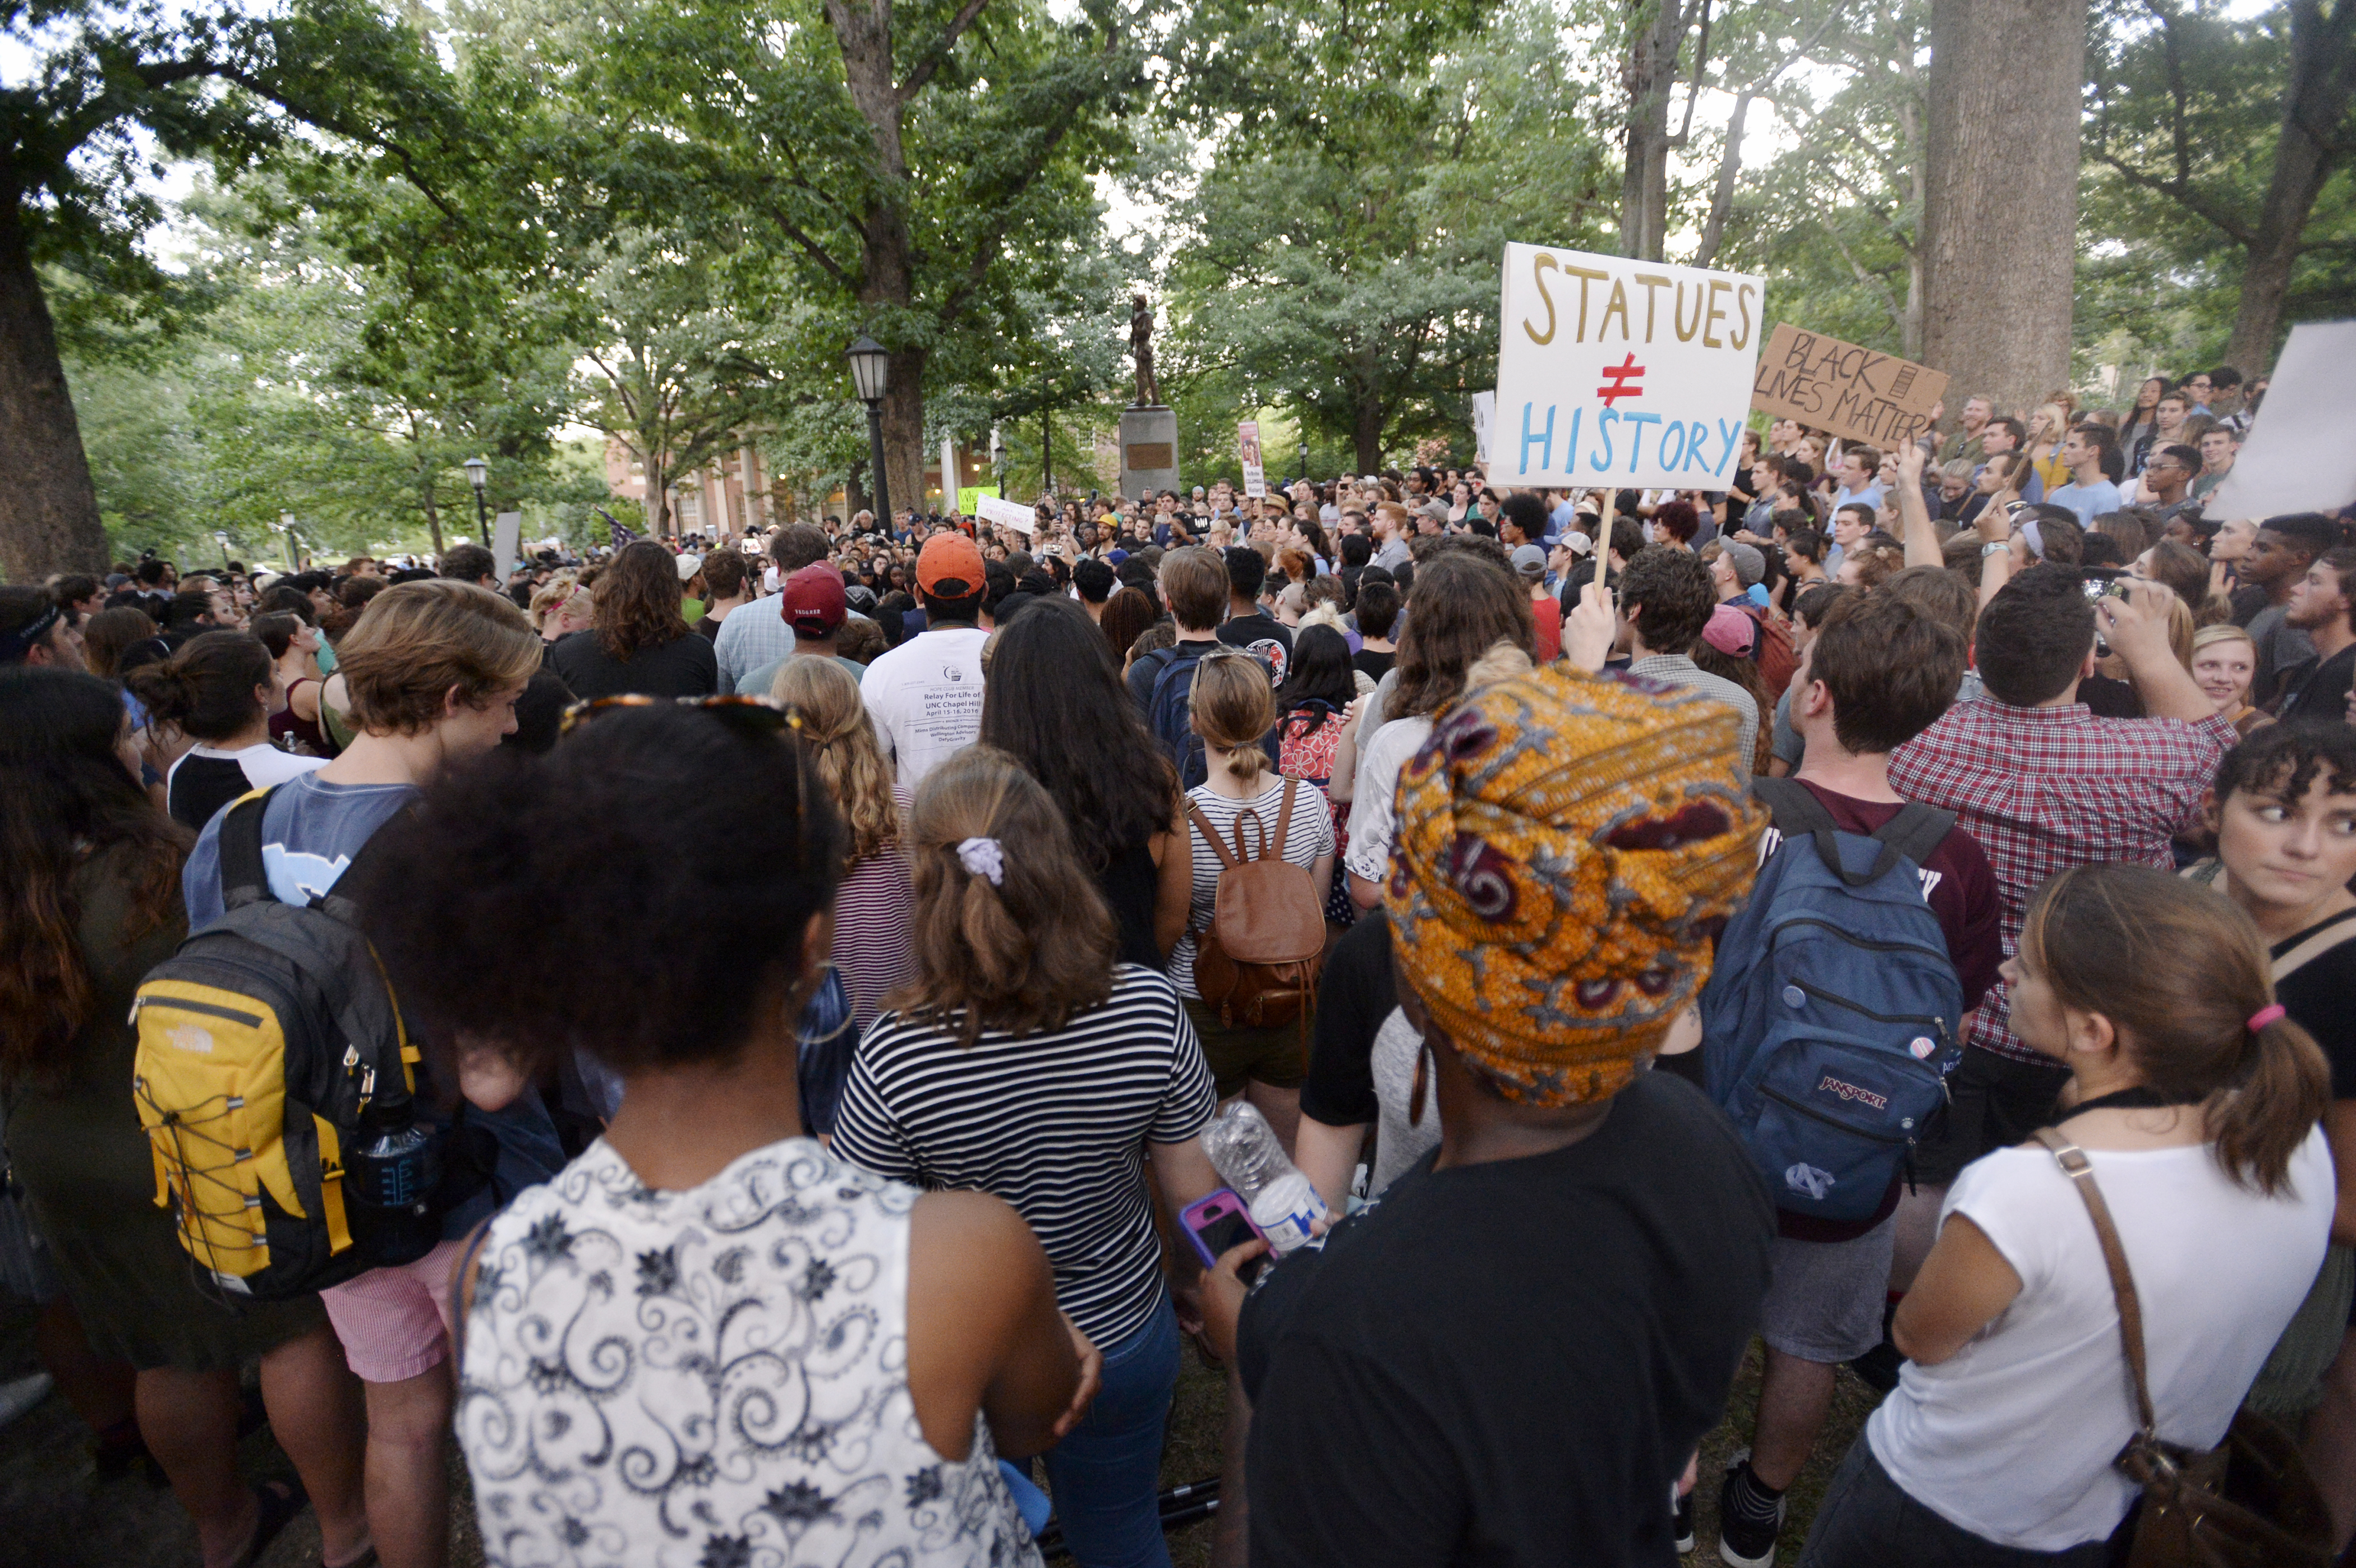 Demonstrators rally for the removal of a Confederate statue, coined Silent Sam, on the campus of the University of Chapel Hill on Aug. 22, 2017 in Chapel Hill, North Carolina. (Sara D. Davis/Getty Images)